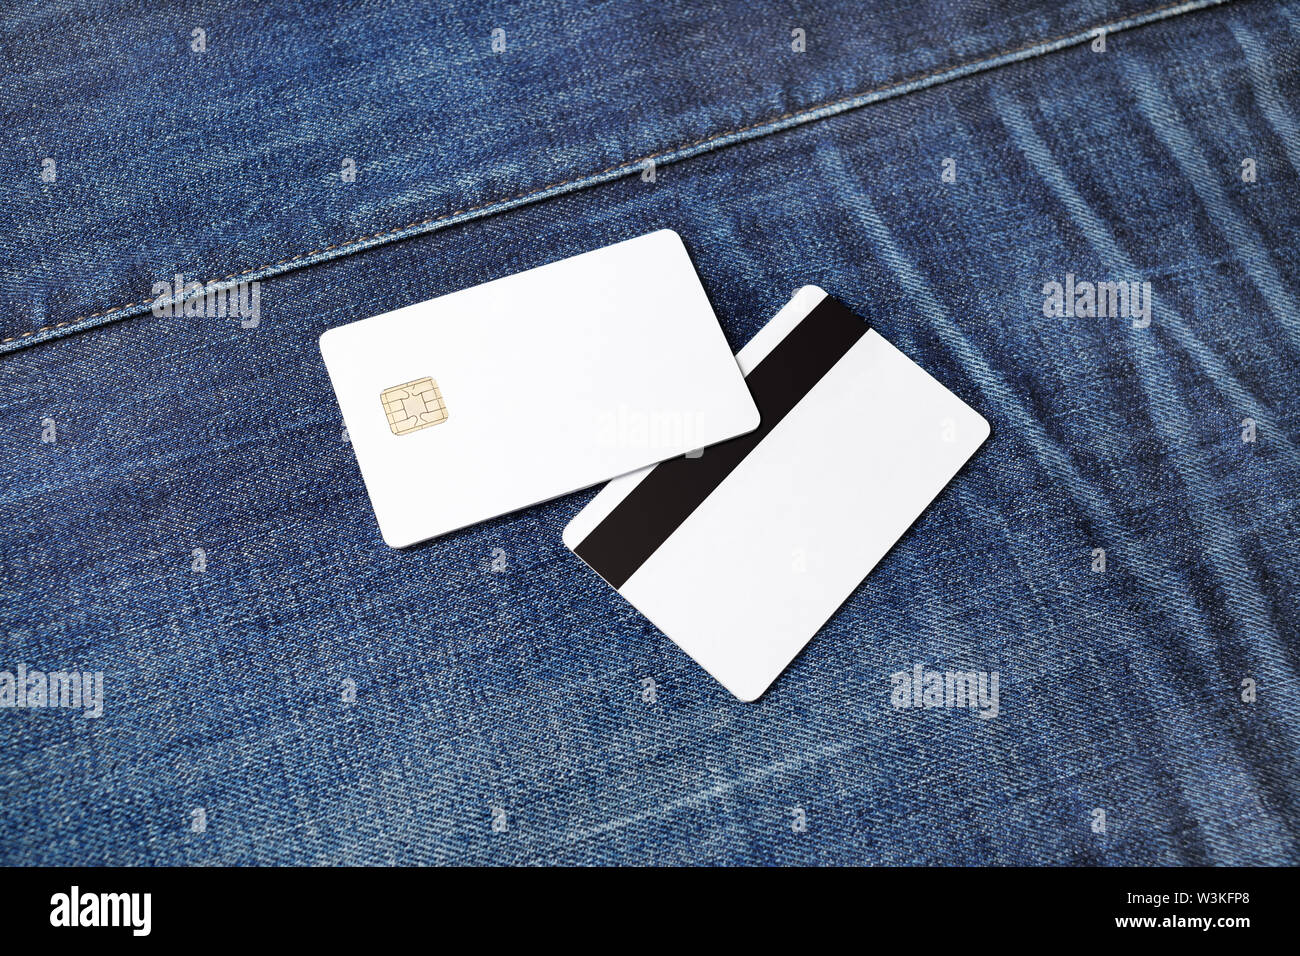 Two bank plastic bank cards on denim background. White credit cards. Front and back view. Stock Photo